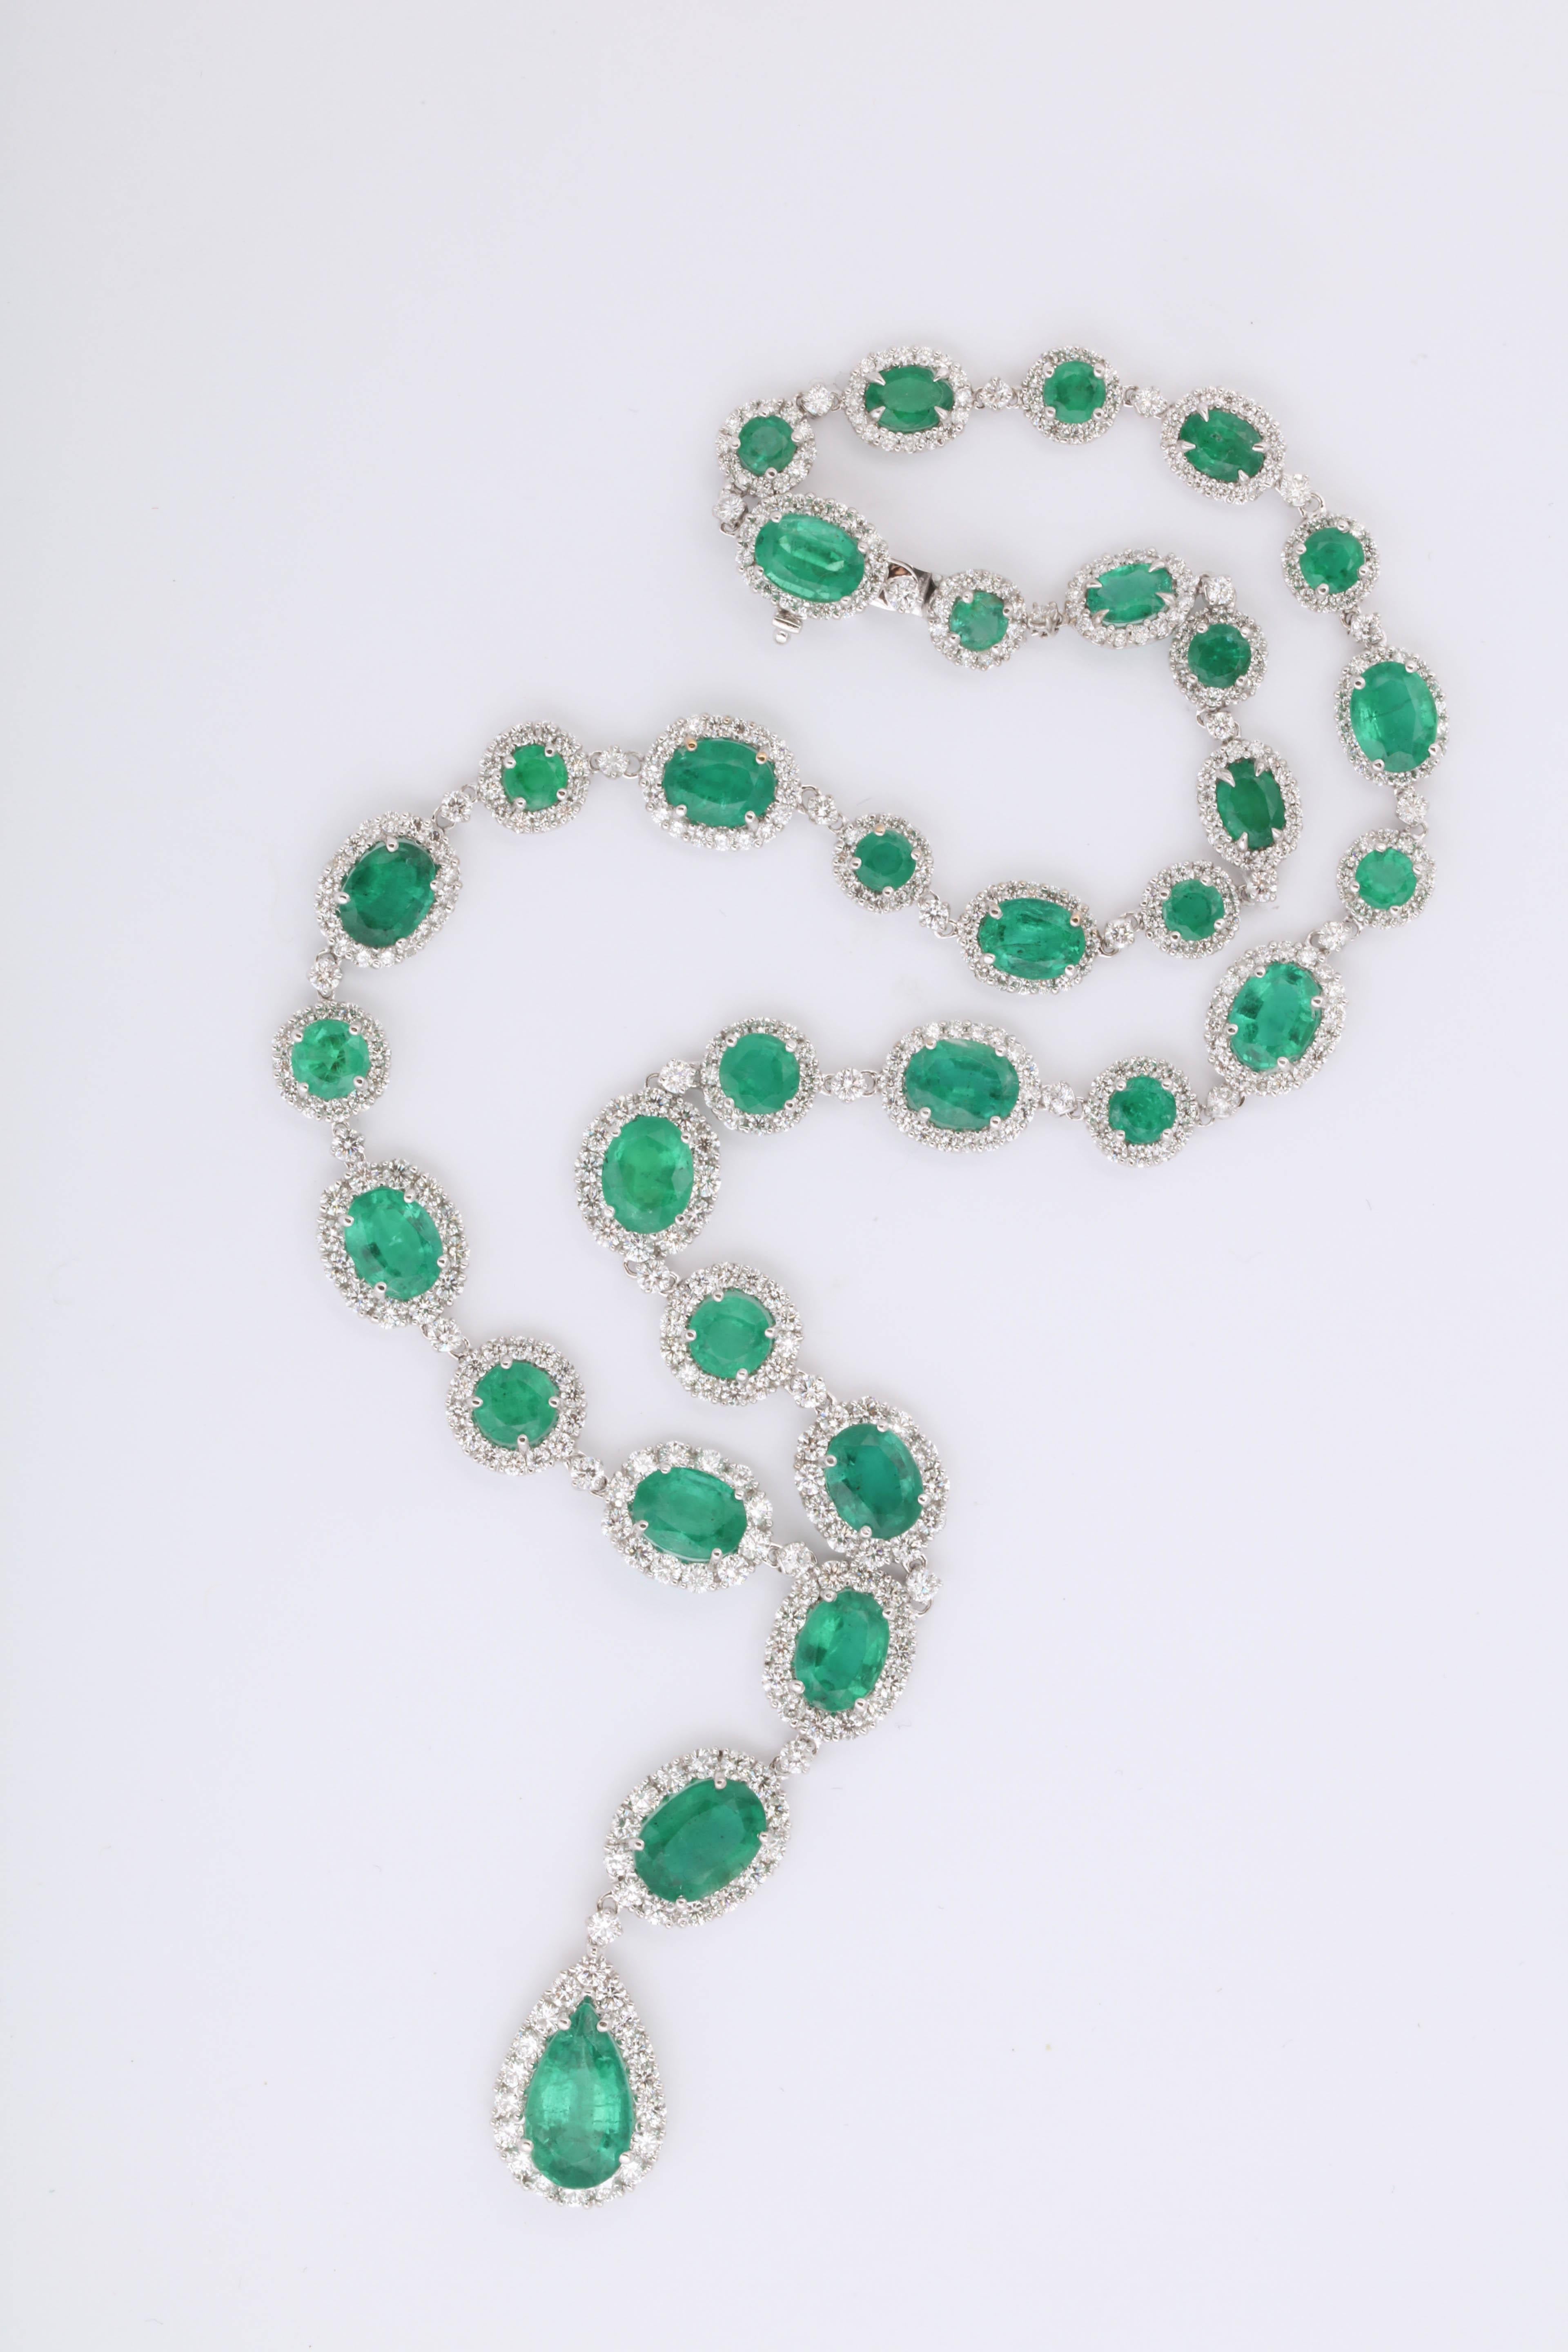 Women's Emerald and Diamond Necklace